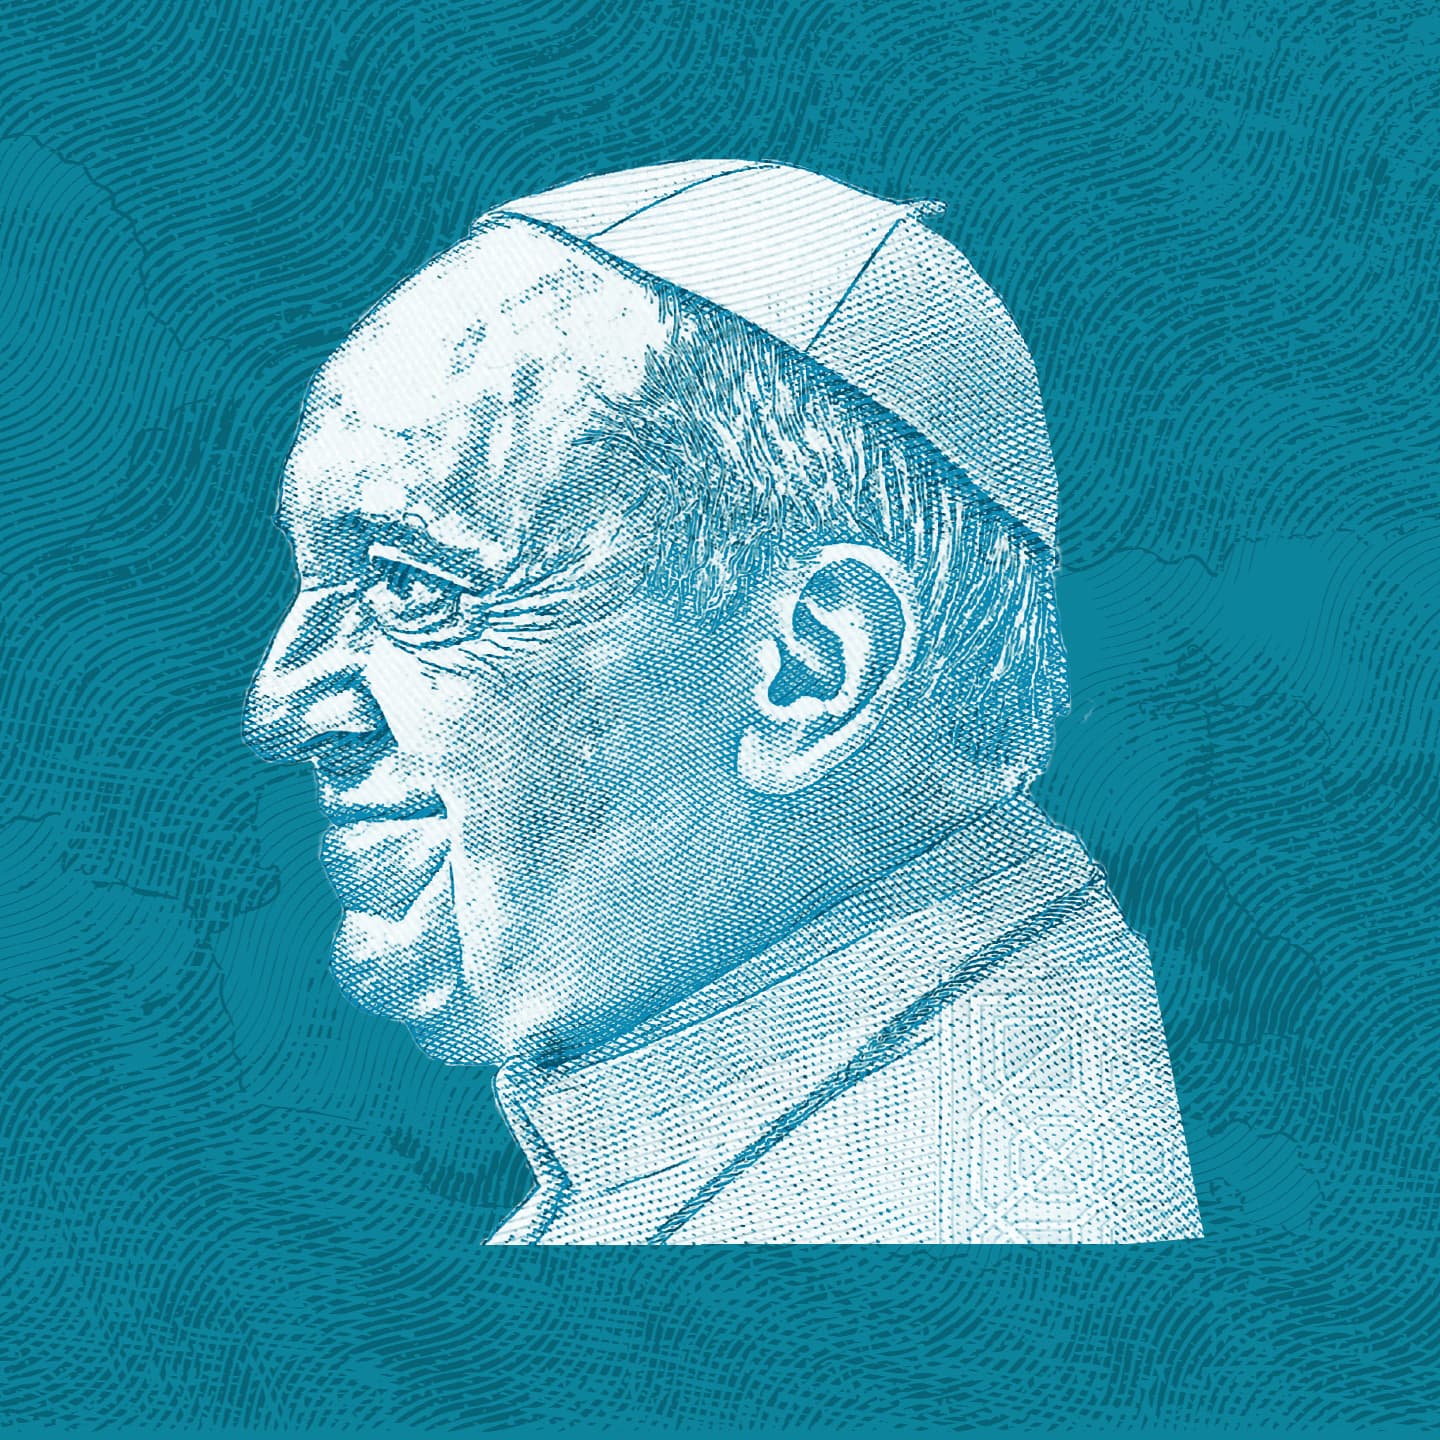 illustration of the pope's side profile